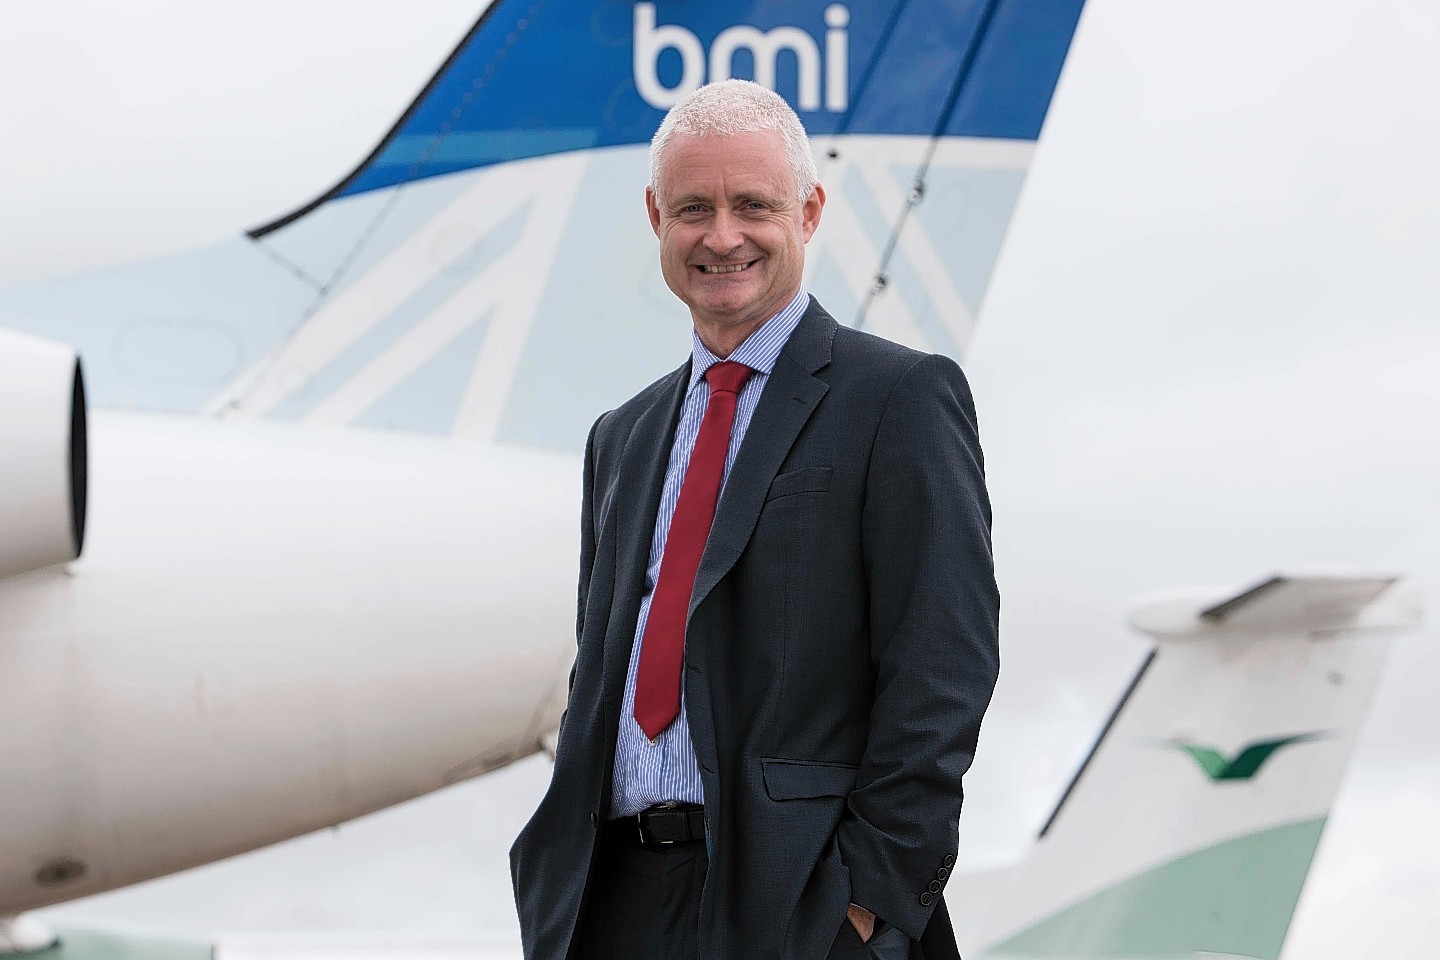 Cathal O'Connell, who has just left bmi regional